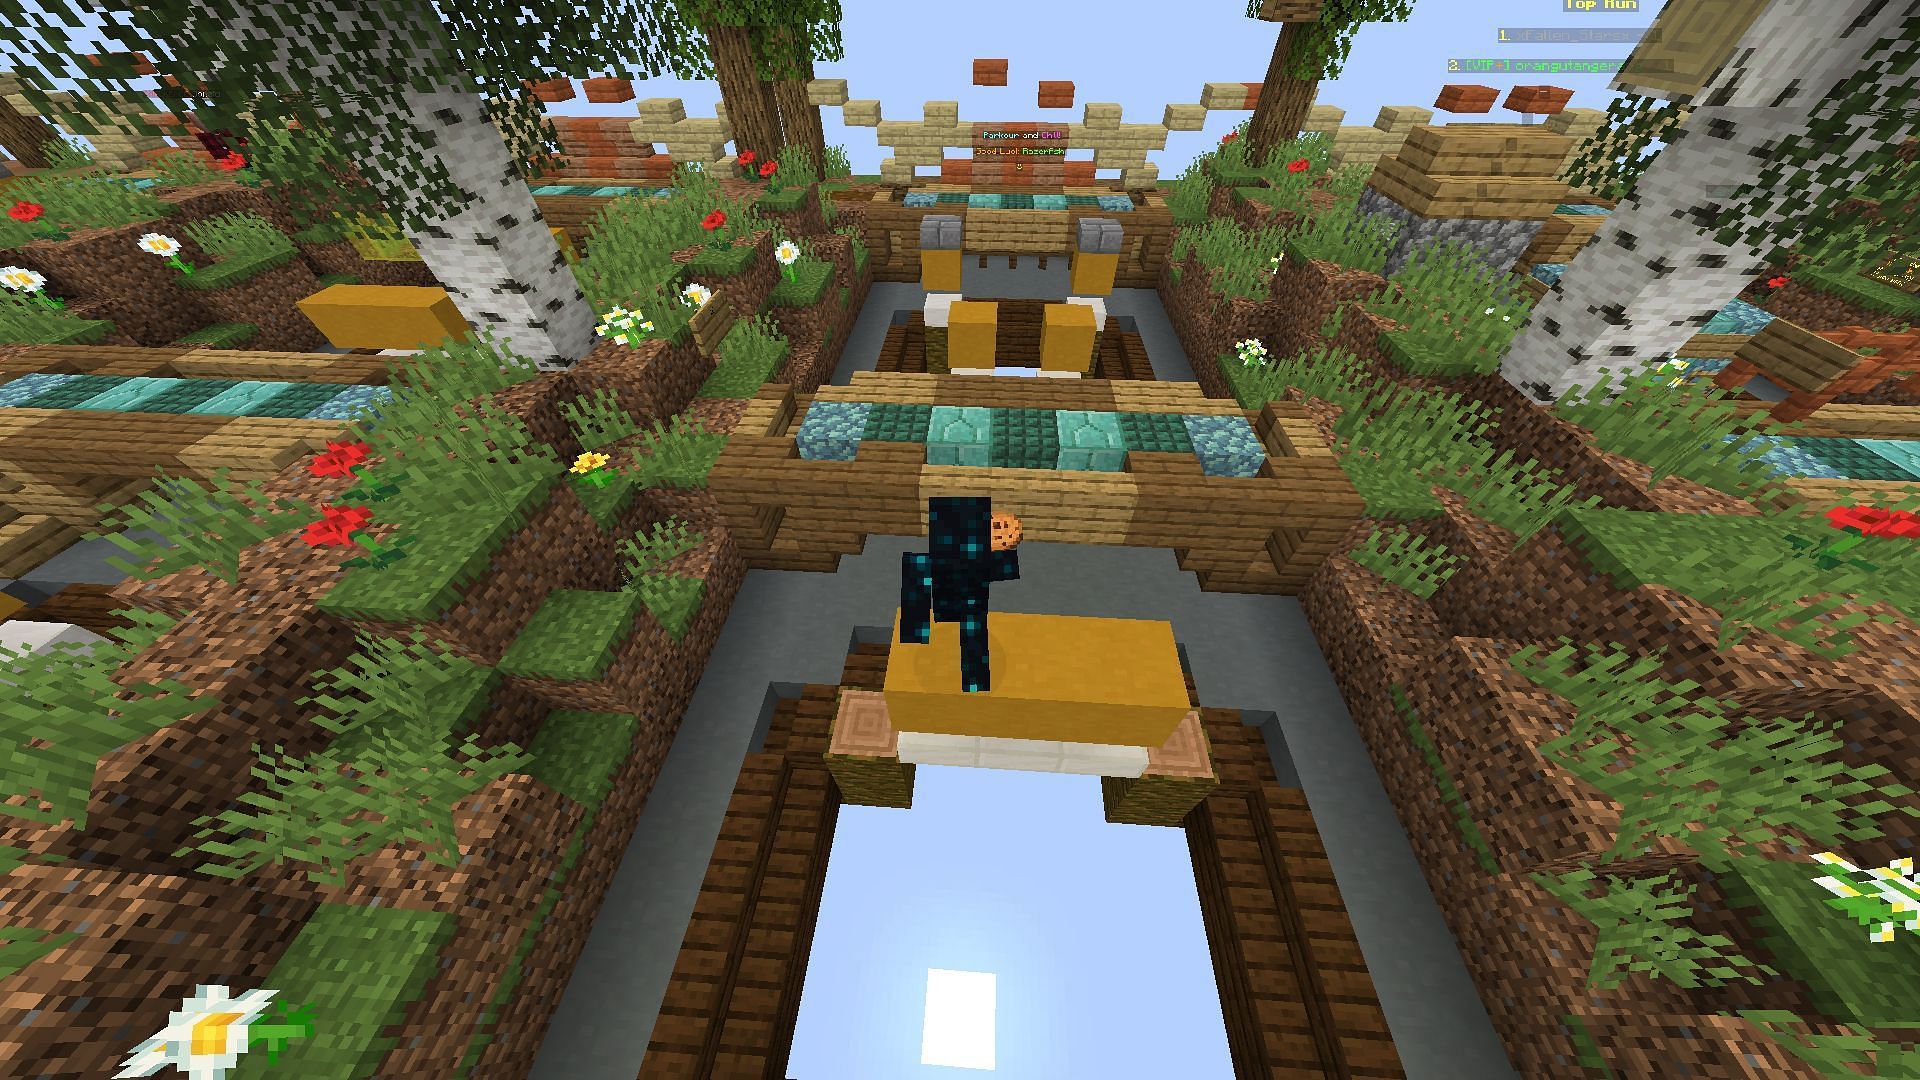 Jumping in a particular rhythm will really help players in Minecraft (Image via Mojang)